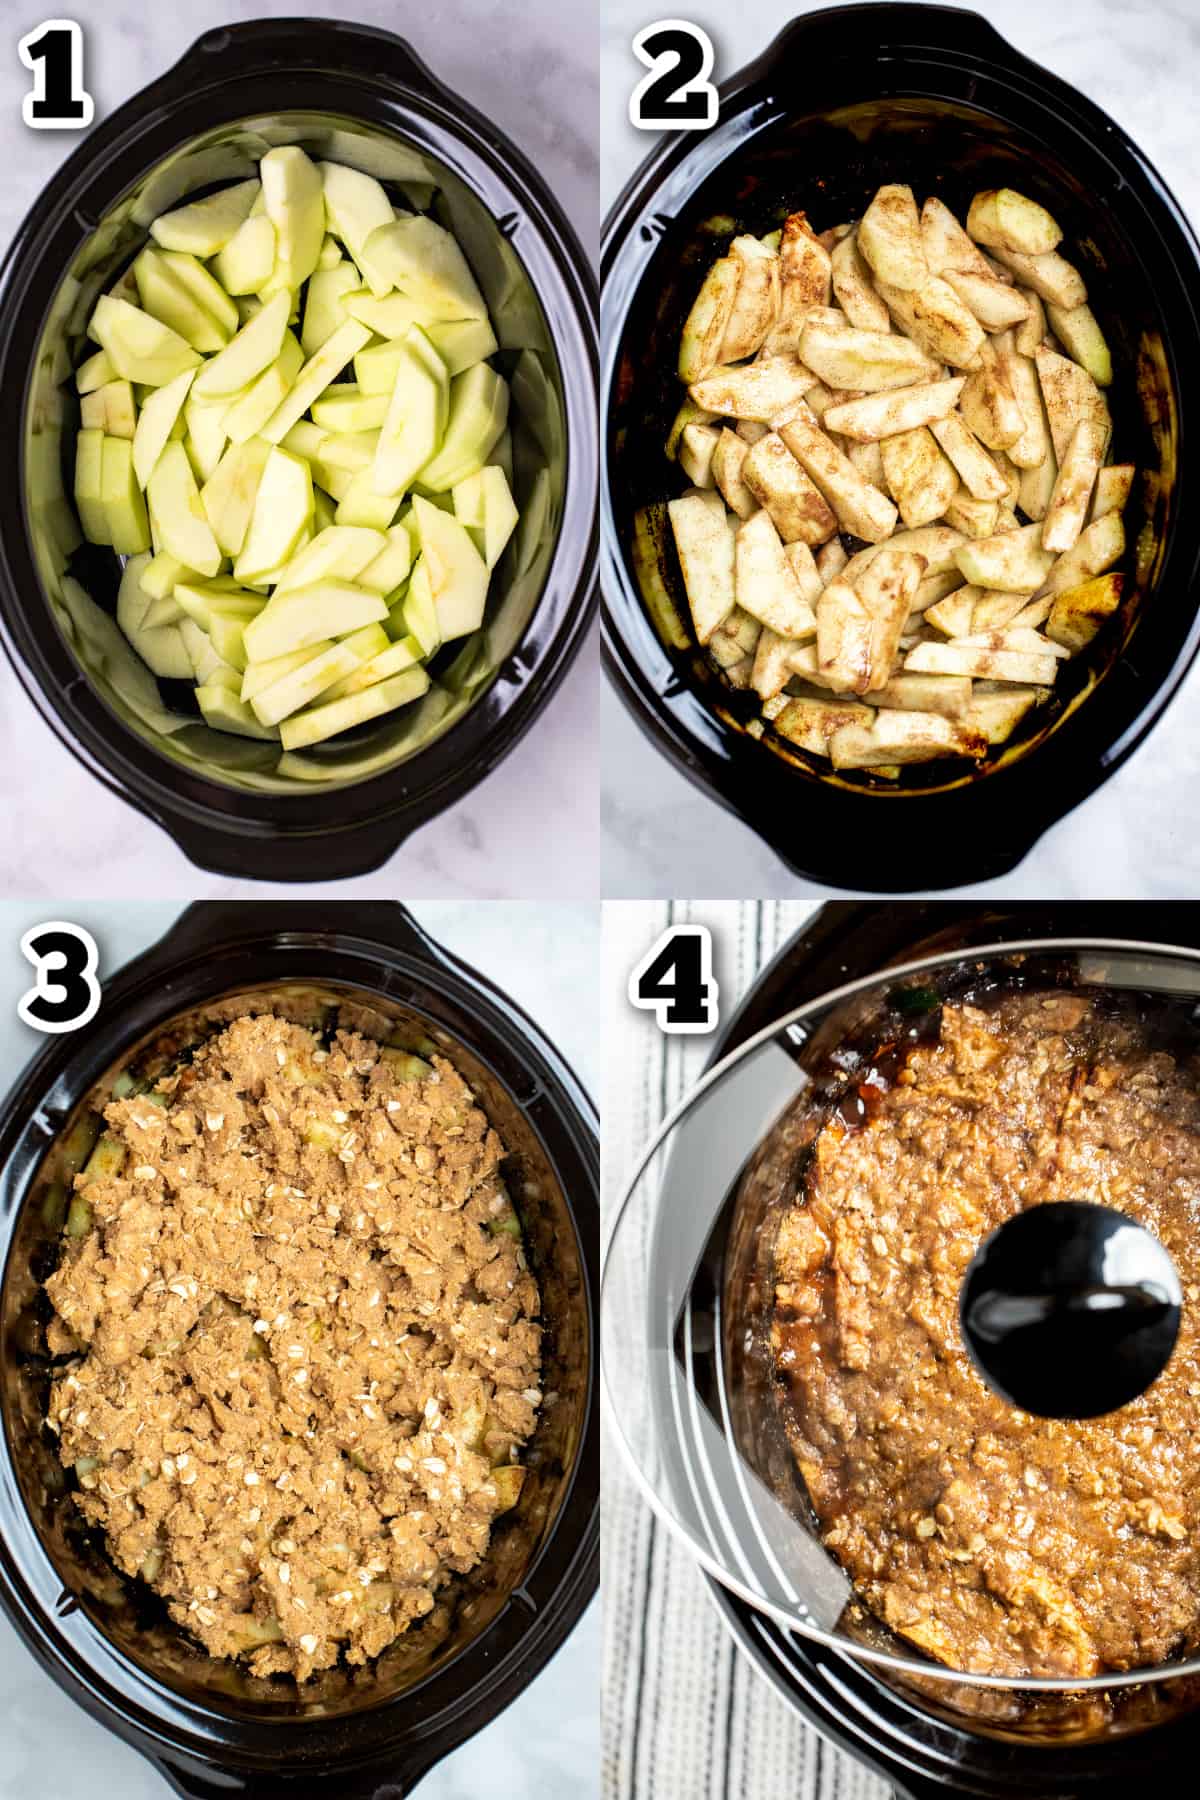 Step by step photos for how to make slow cooker apple crisp.